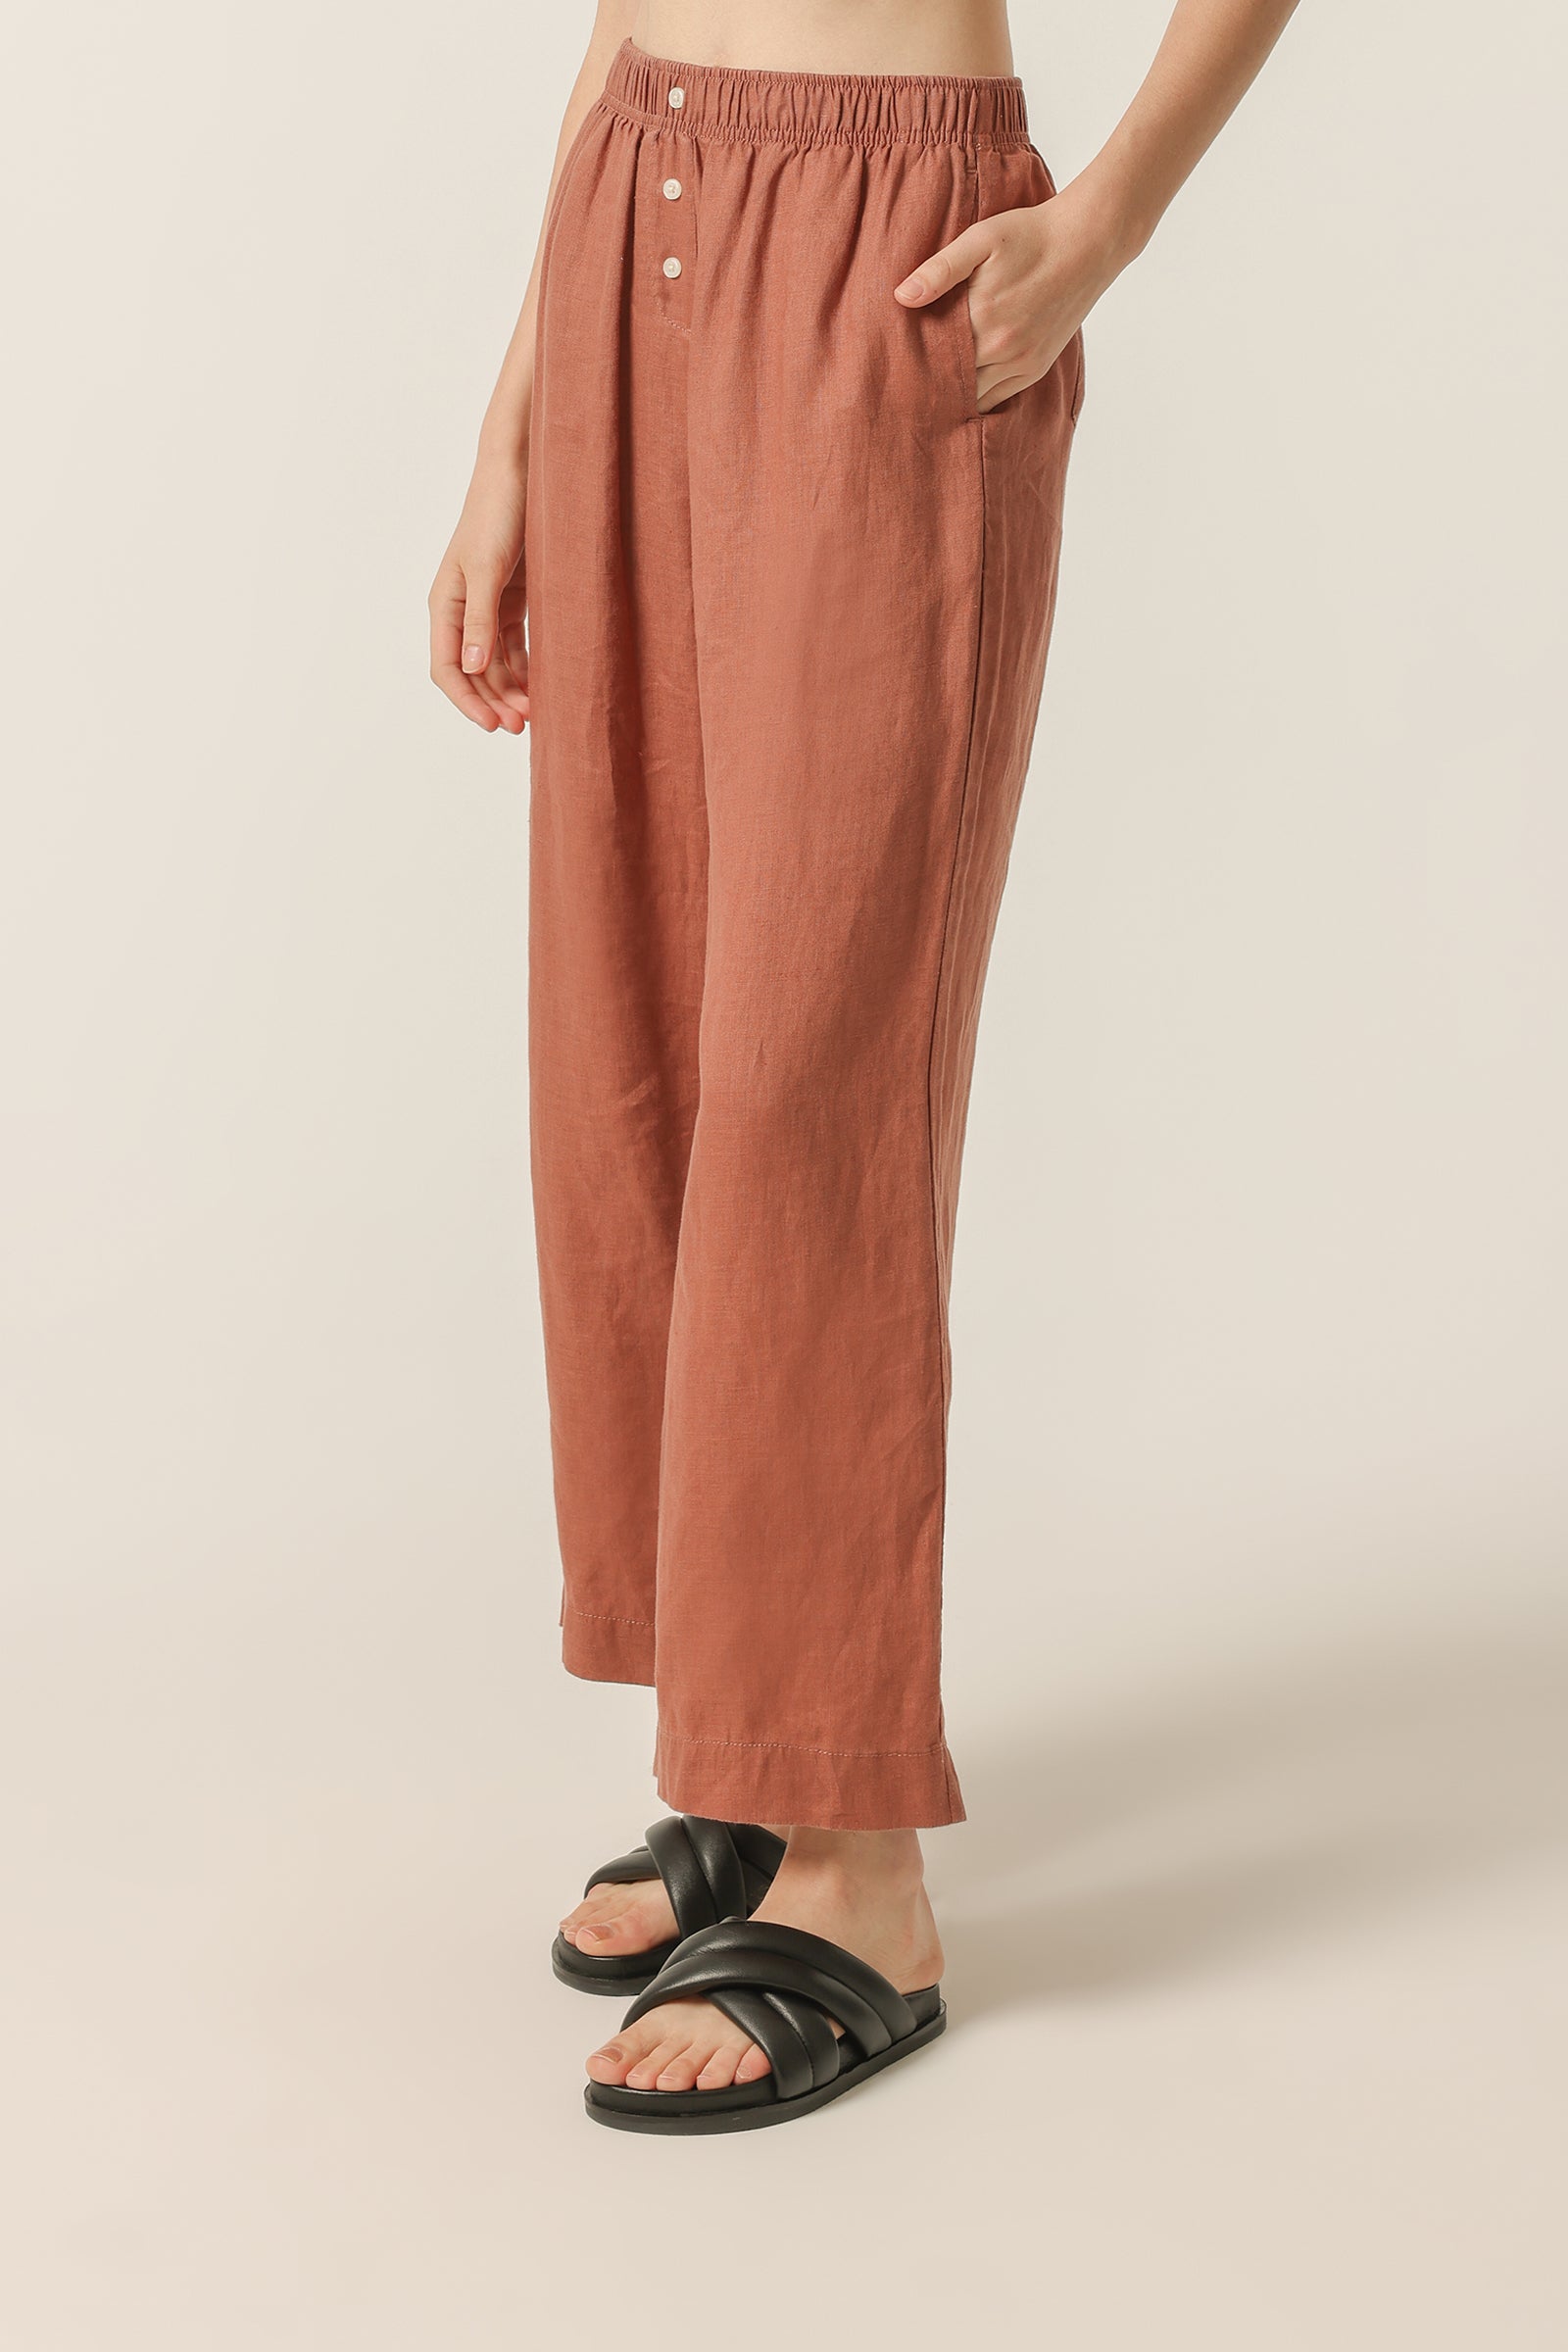 Nude Lucy Lounge Linen Crop Pant In A Light Brown Brandy Colour 